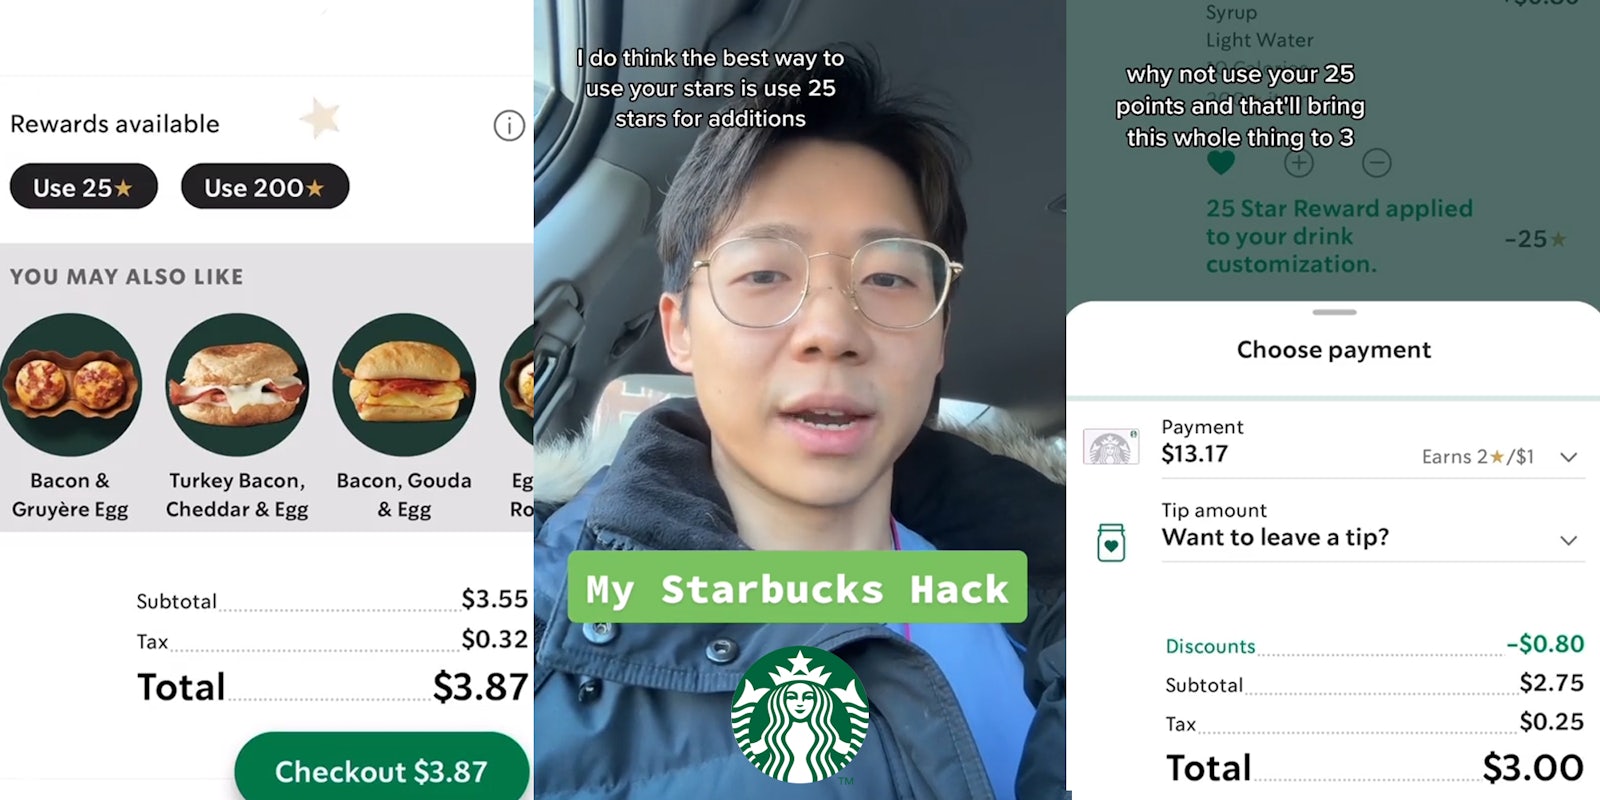 Customer Shares How To Get Most Value Out of Starbucks Stars